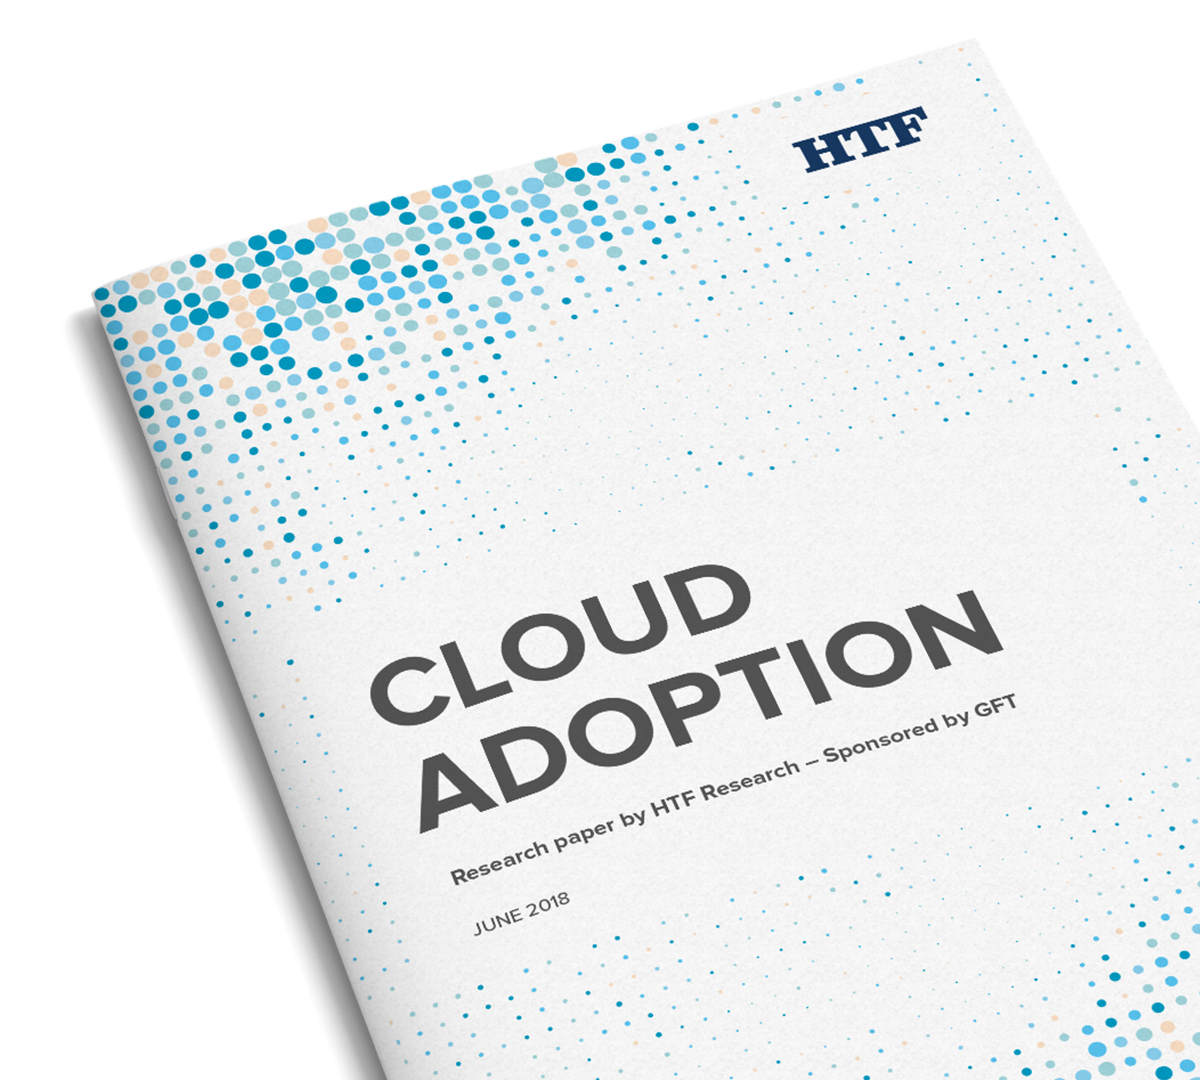 As cloud becomes mainstream, this independent survey evaluates the cloud adoption strategies of some of the world’s Tier 1 and Tier 2 investment banks.